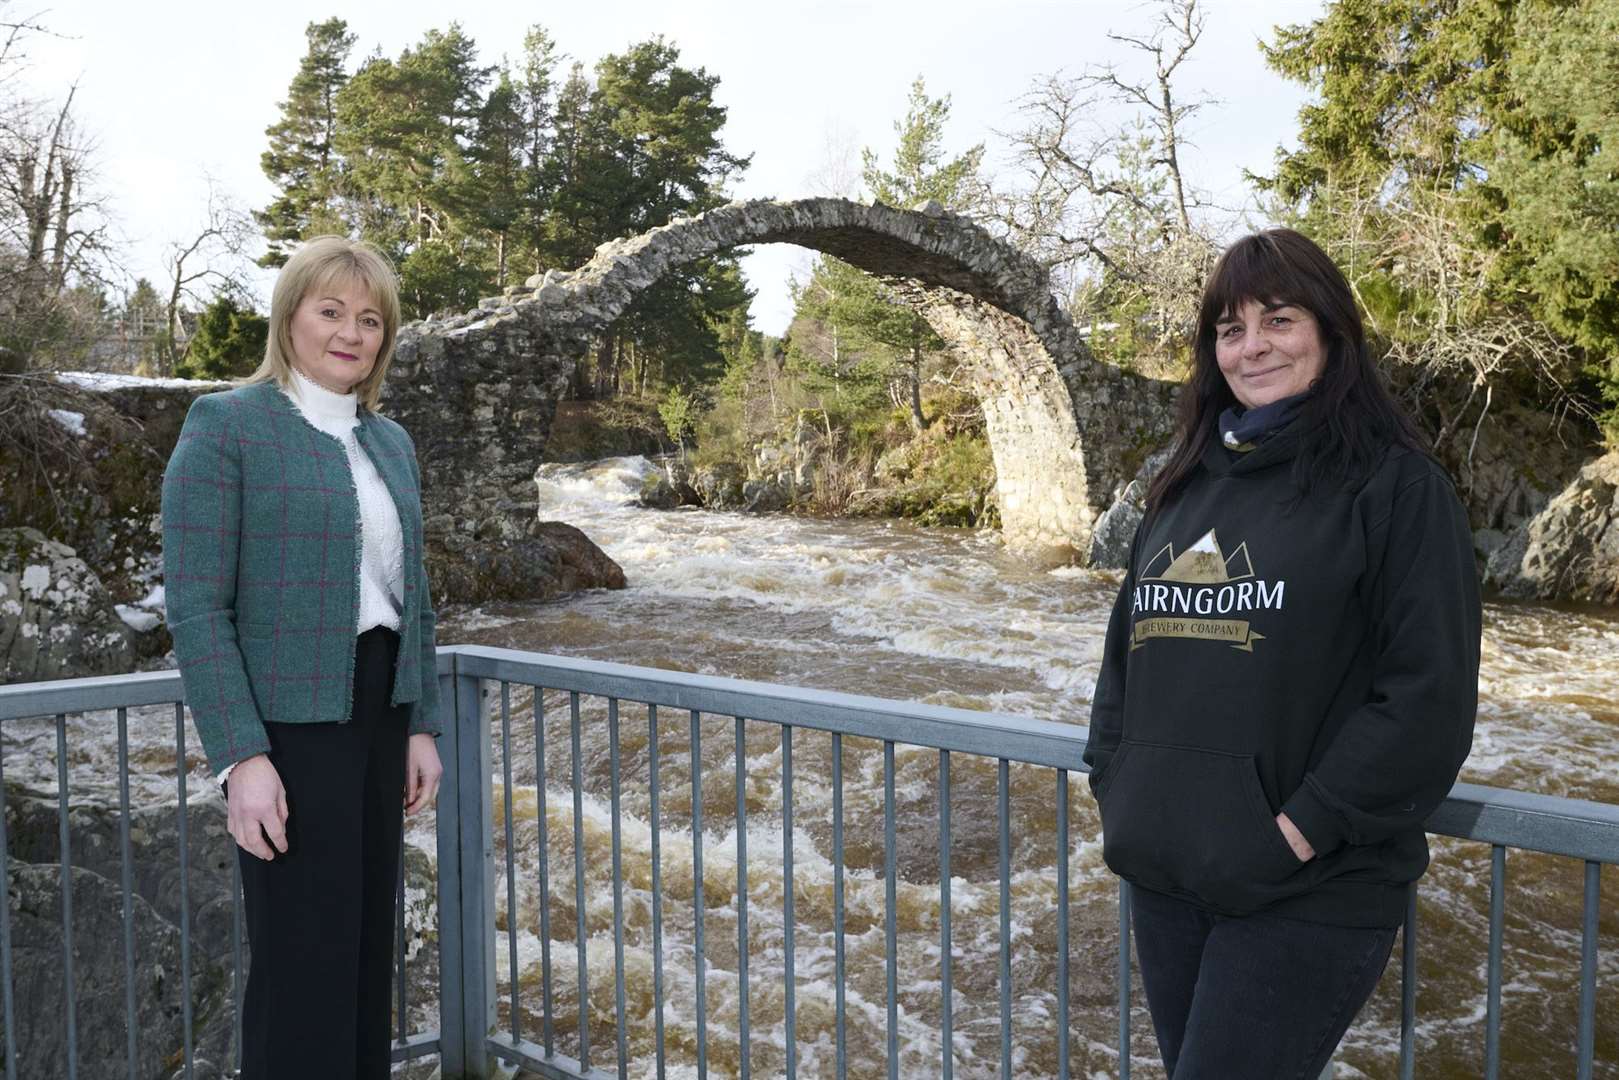 Yvonne Crook (left) and Sam Faircliff (right), co-founders of Highland Tourism.